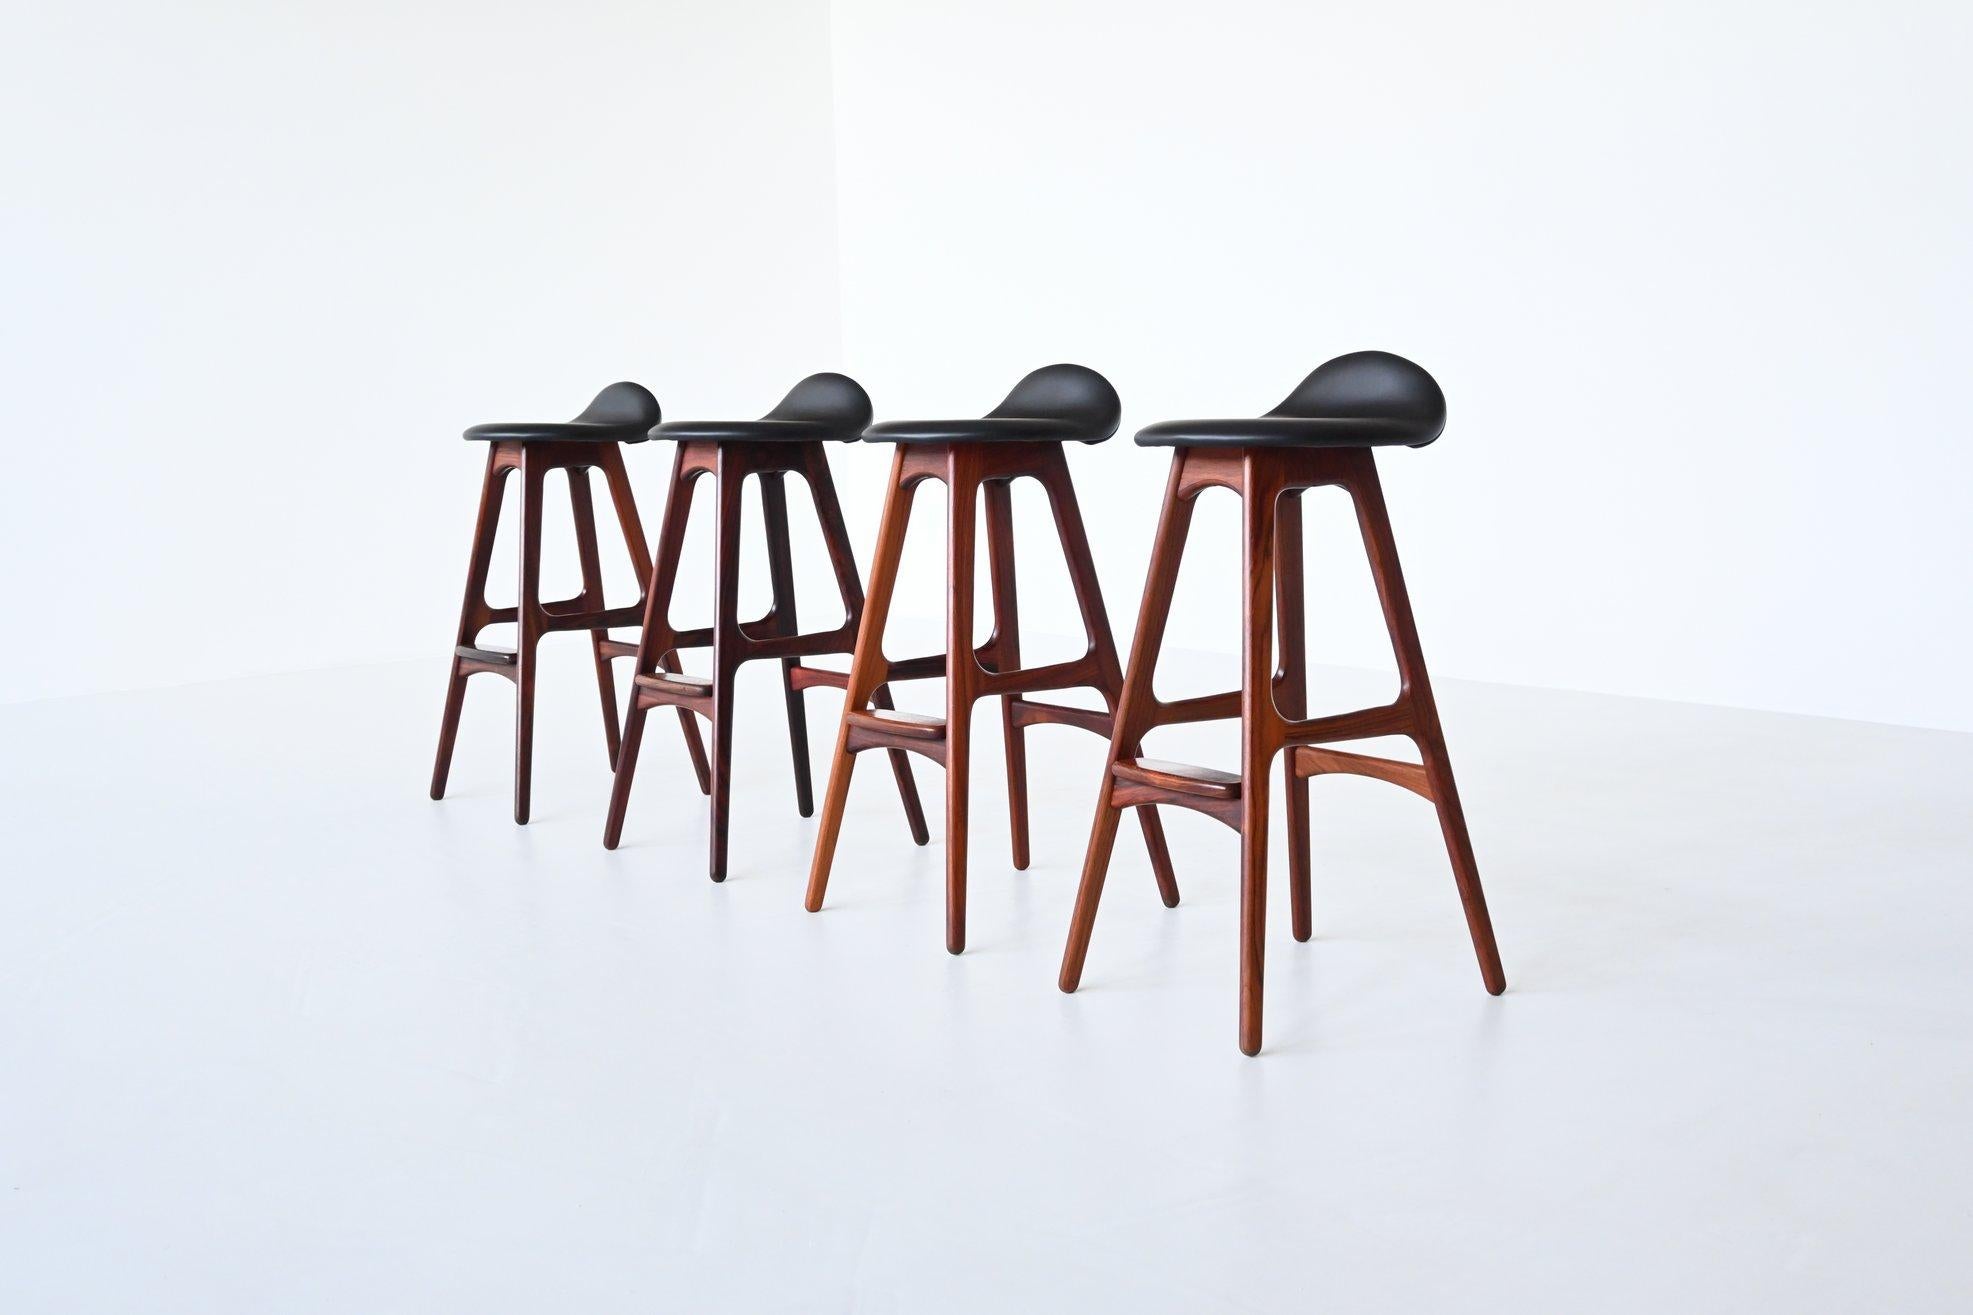 Beautiful shaped iconic bar stools model OD61 designed by Erik Buch for Odense Møbler, Denmark 1965. These well-crafted stools have sophisticated solid rosewood frames. Finished into perfection with nice dovetail connections. The seats are newly